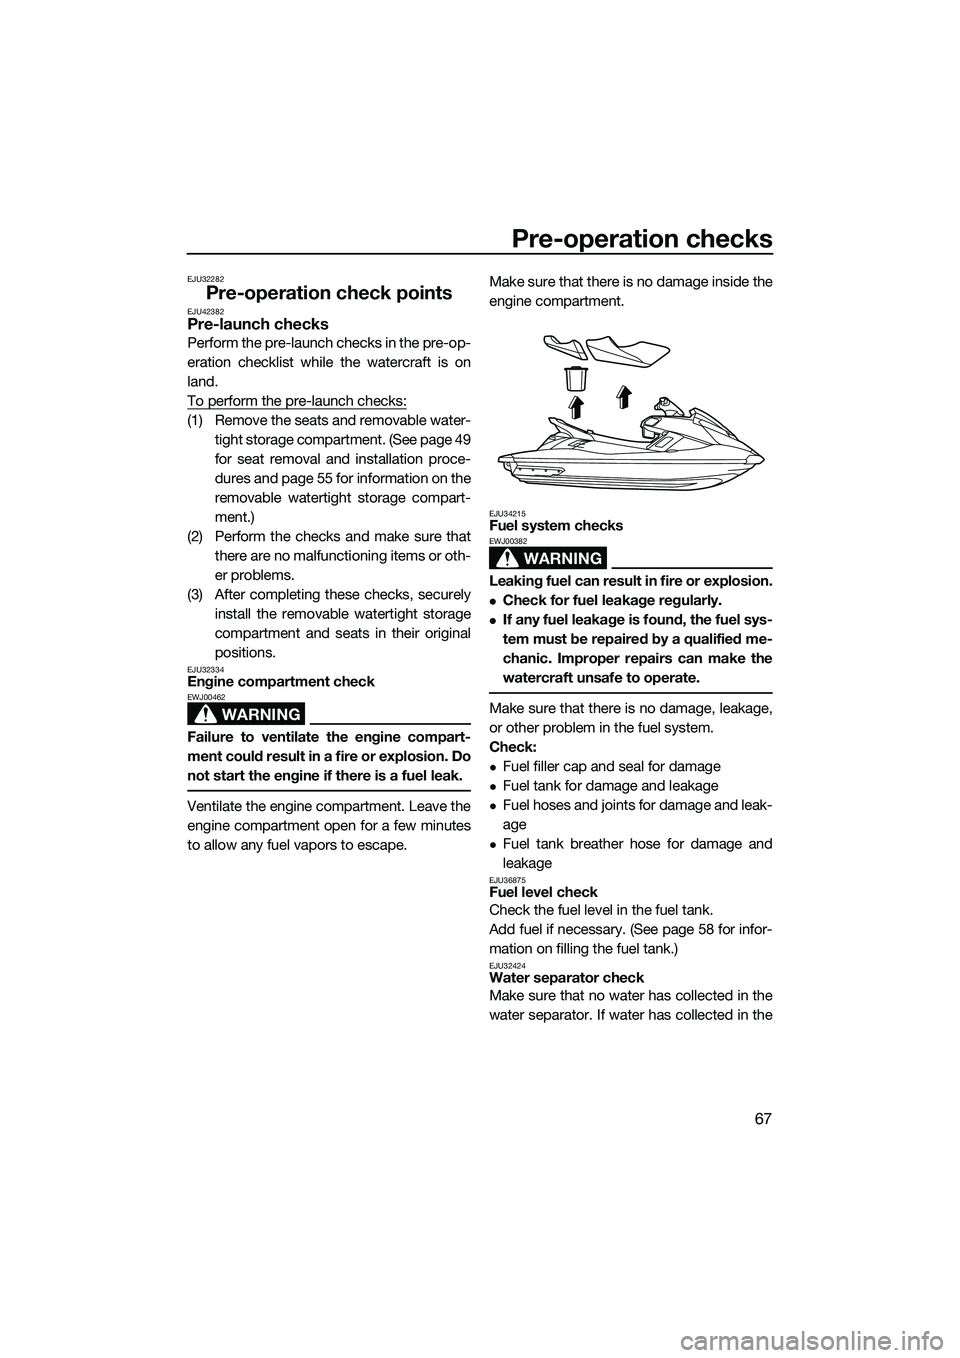 YAMAHA FX HO 2015  Owners Manual Pre-operation checks
67
EJU32282
Pre-operation check pointsEJU42382Pre-launch checks
Perform the pre-launch checks in the pre-op-
eration checklist while the watercraft is on
land.
To perform the pre-